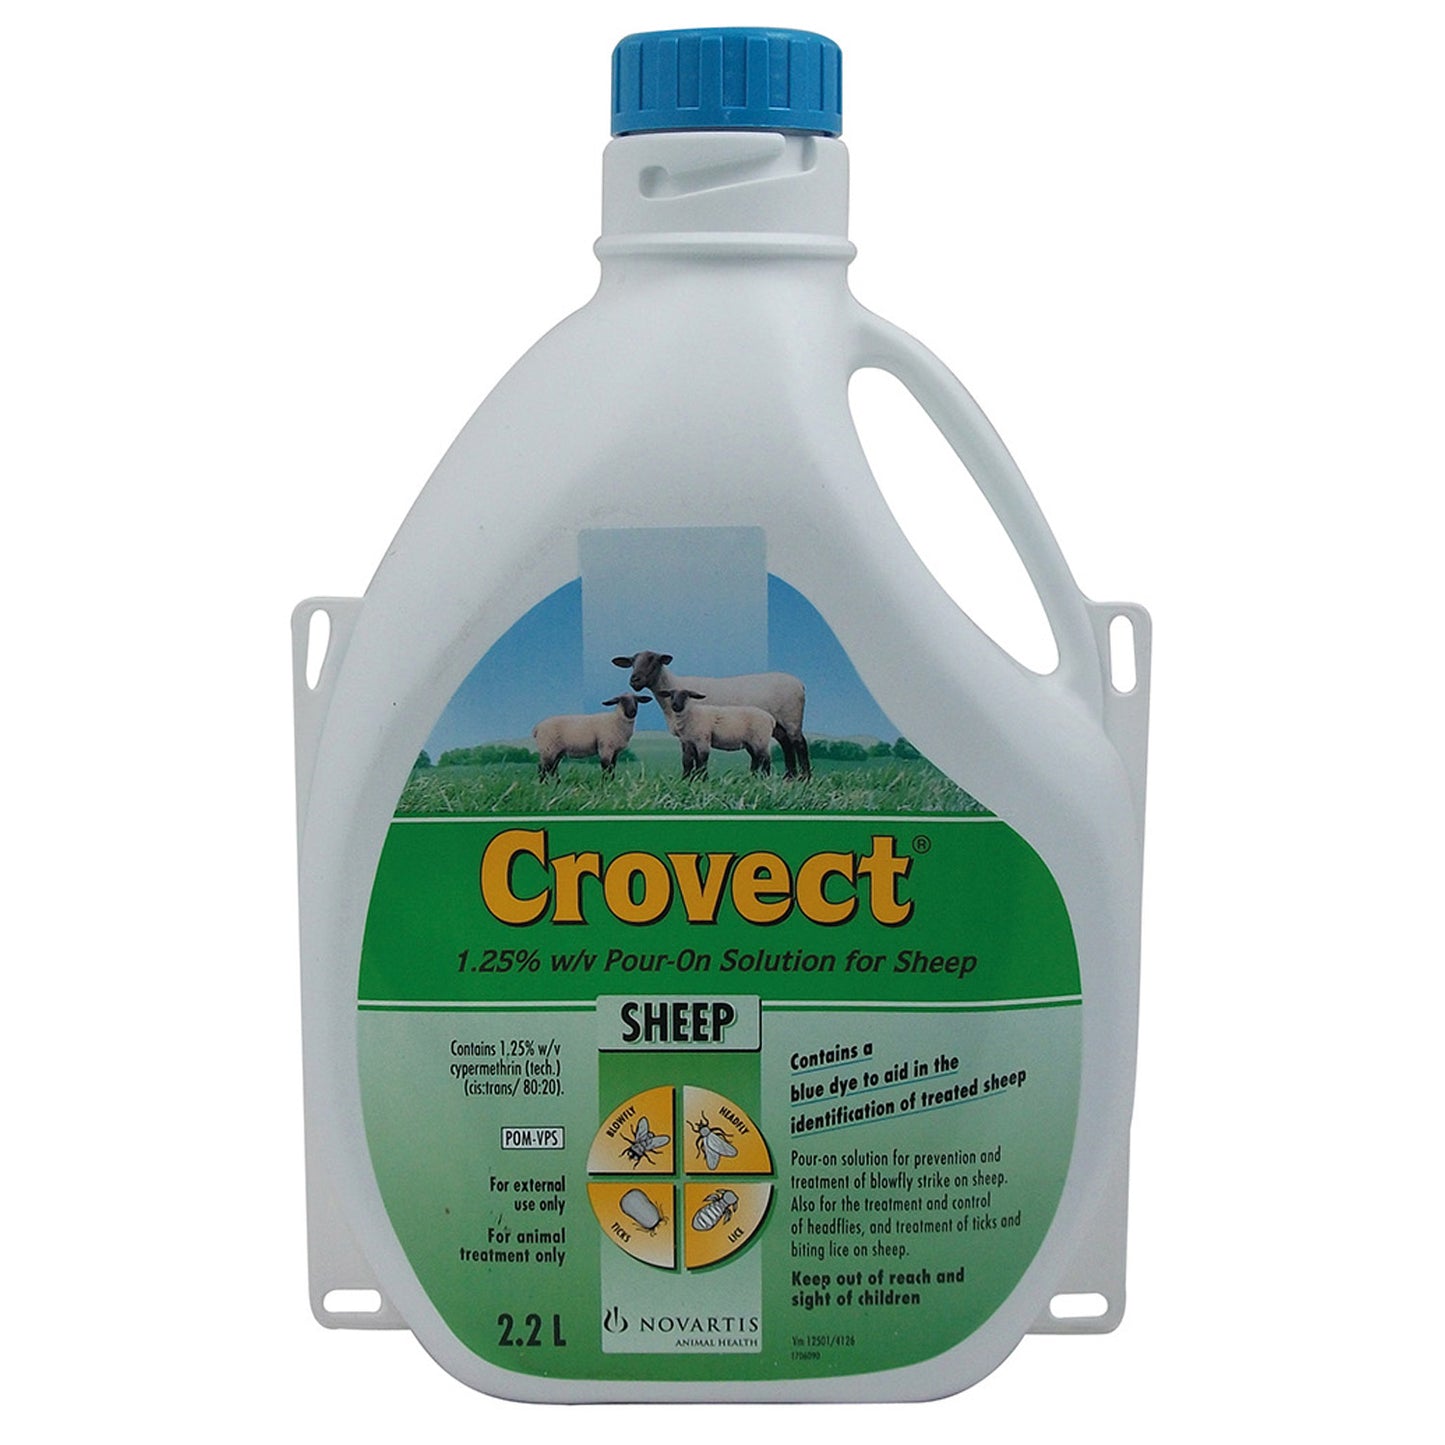 Crovect 1.25% w/v Pour-On Solution for Sheep